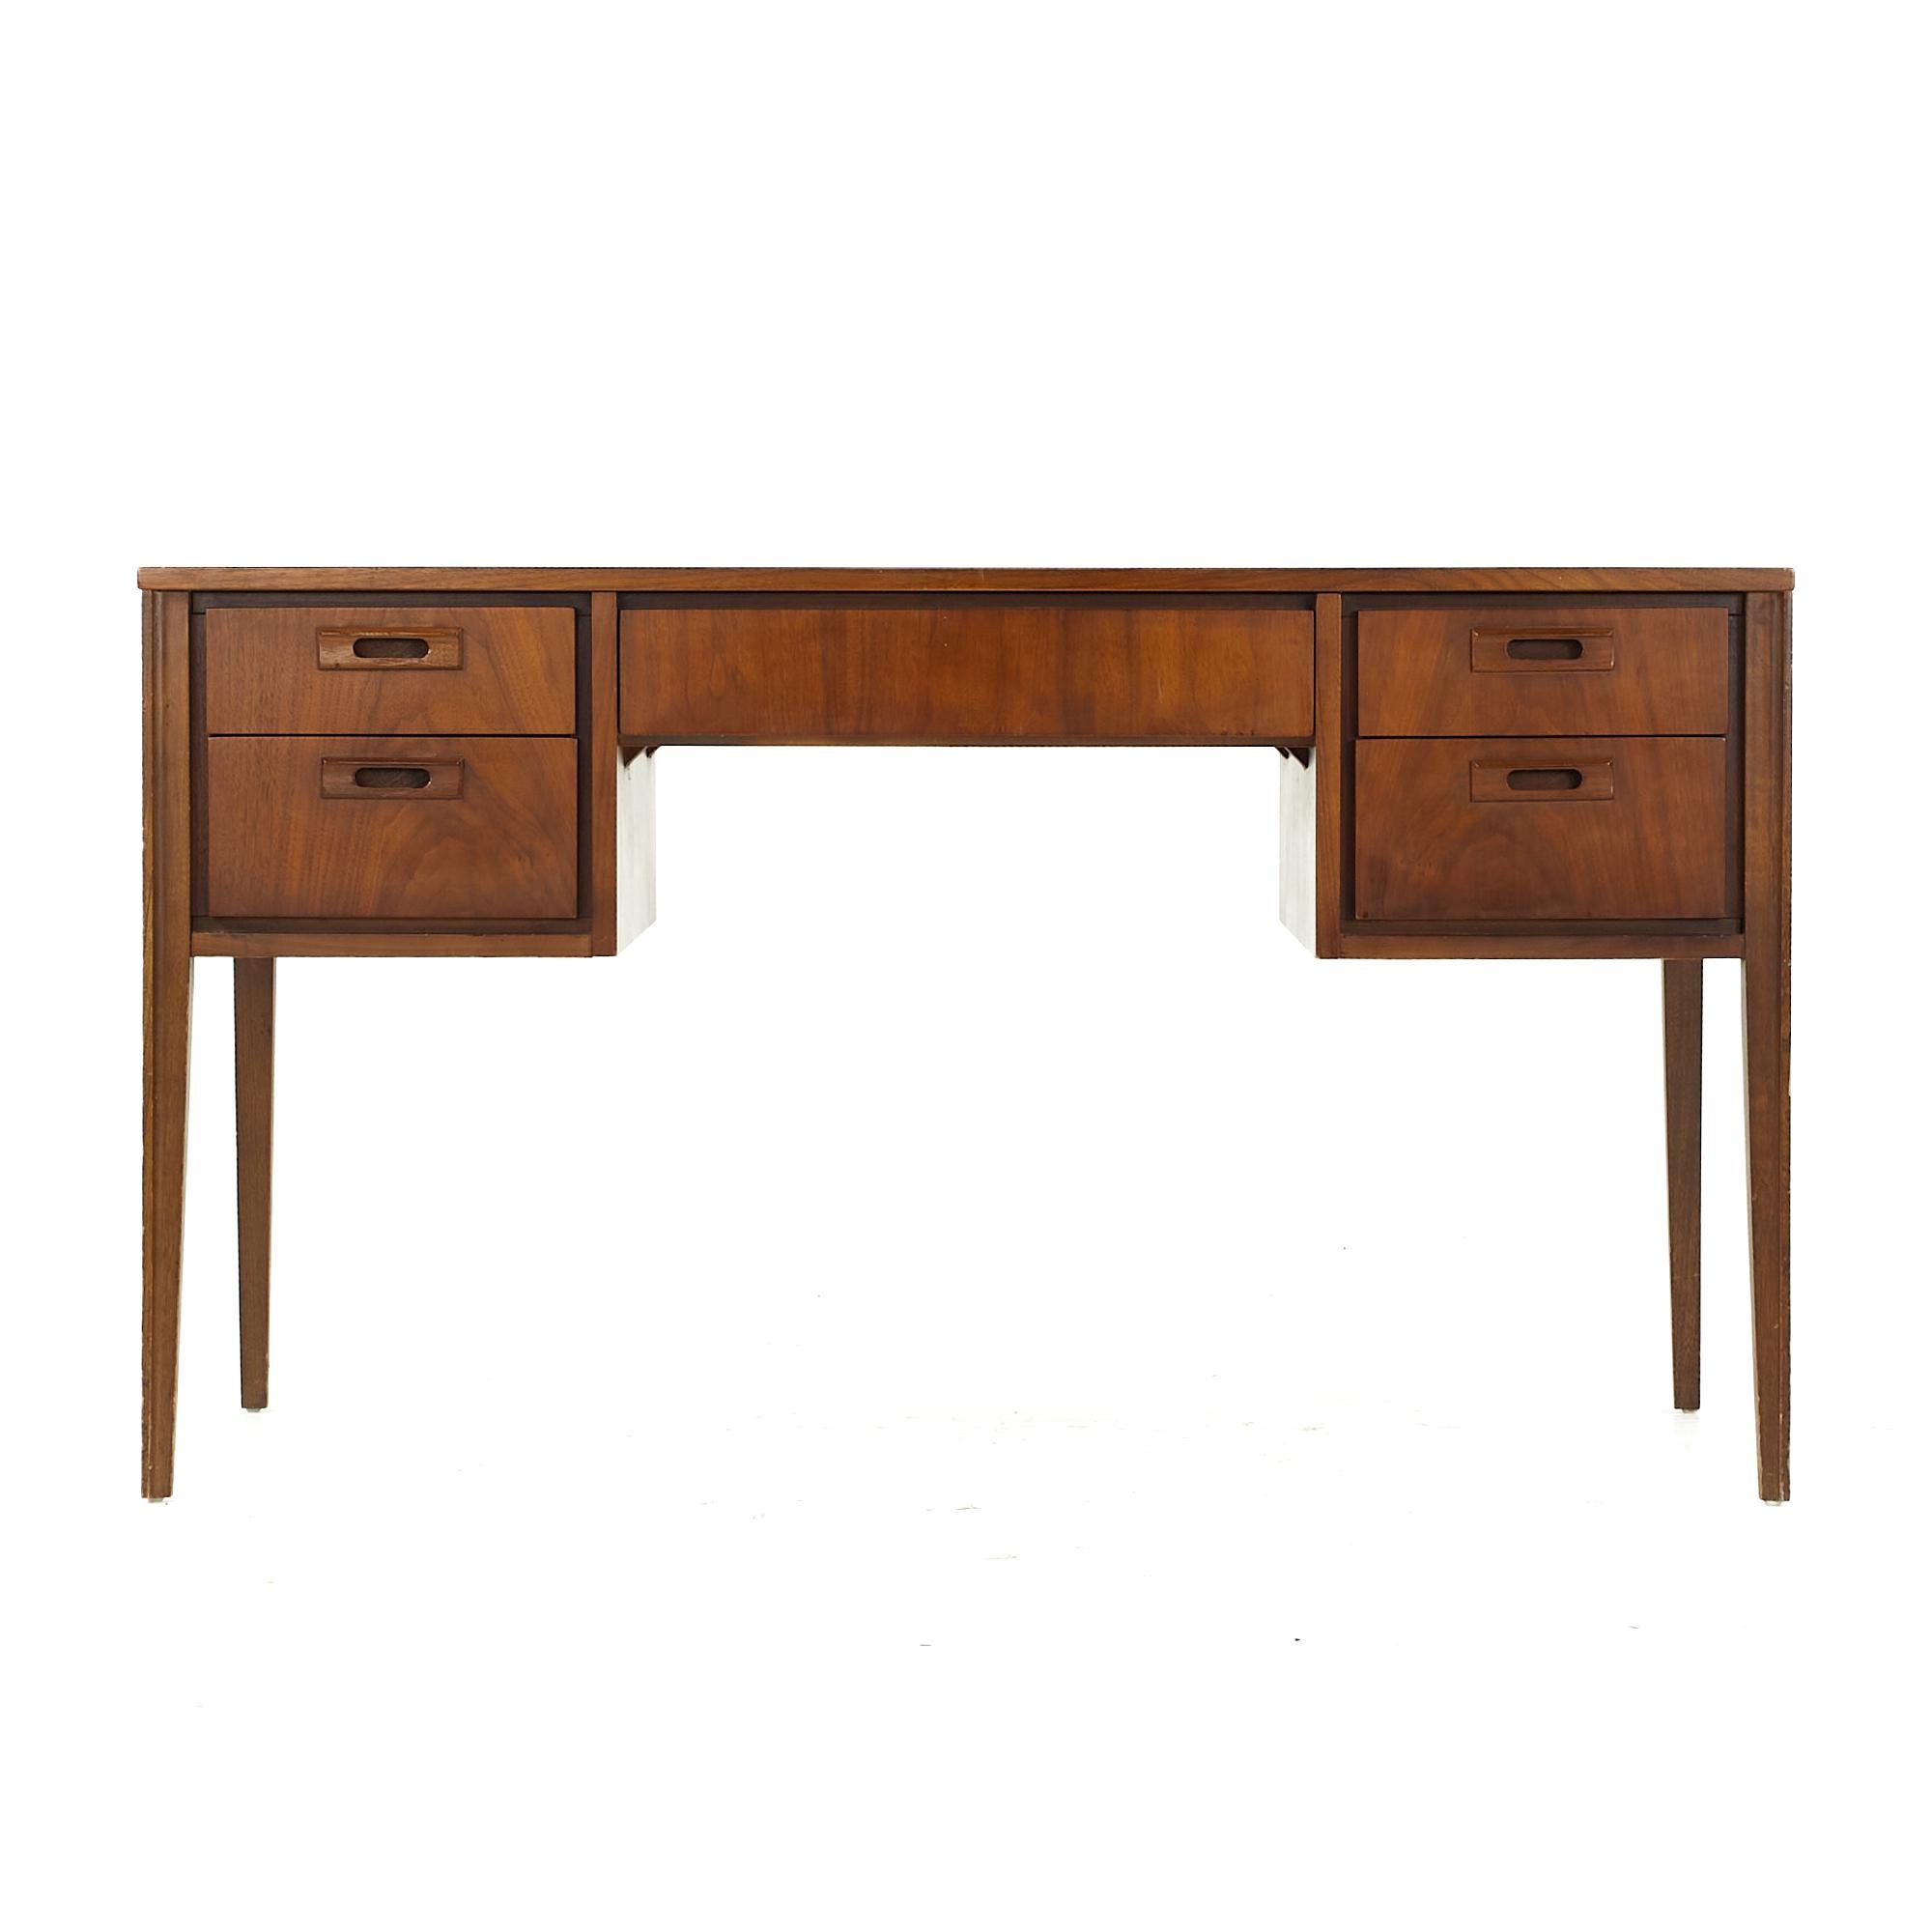 United midcentury walnut and leather top desk

This desk measures: 52 wide x 24 deep x 29.5 high, with a chair clearance of 24 inches

All pieces of furniture can be had in what we call restored vintage condition. That means the piece is